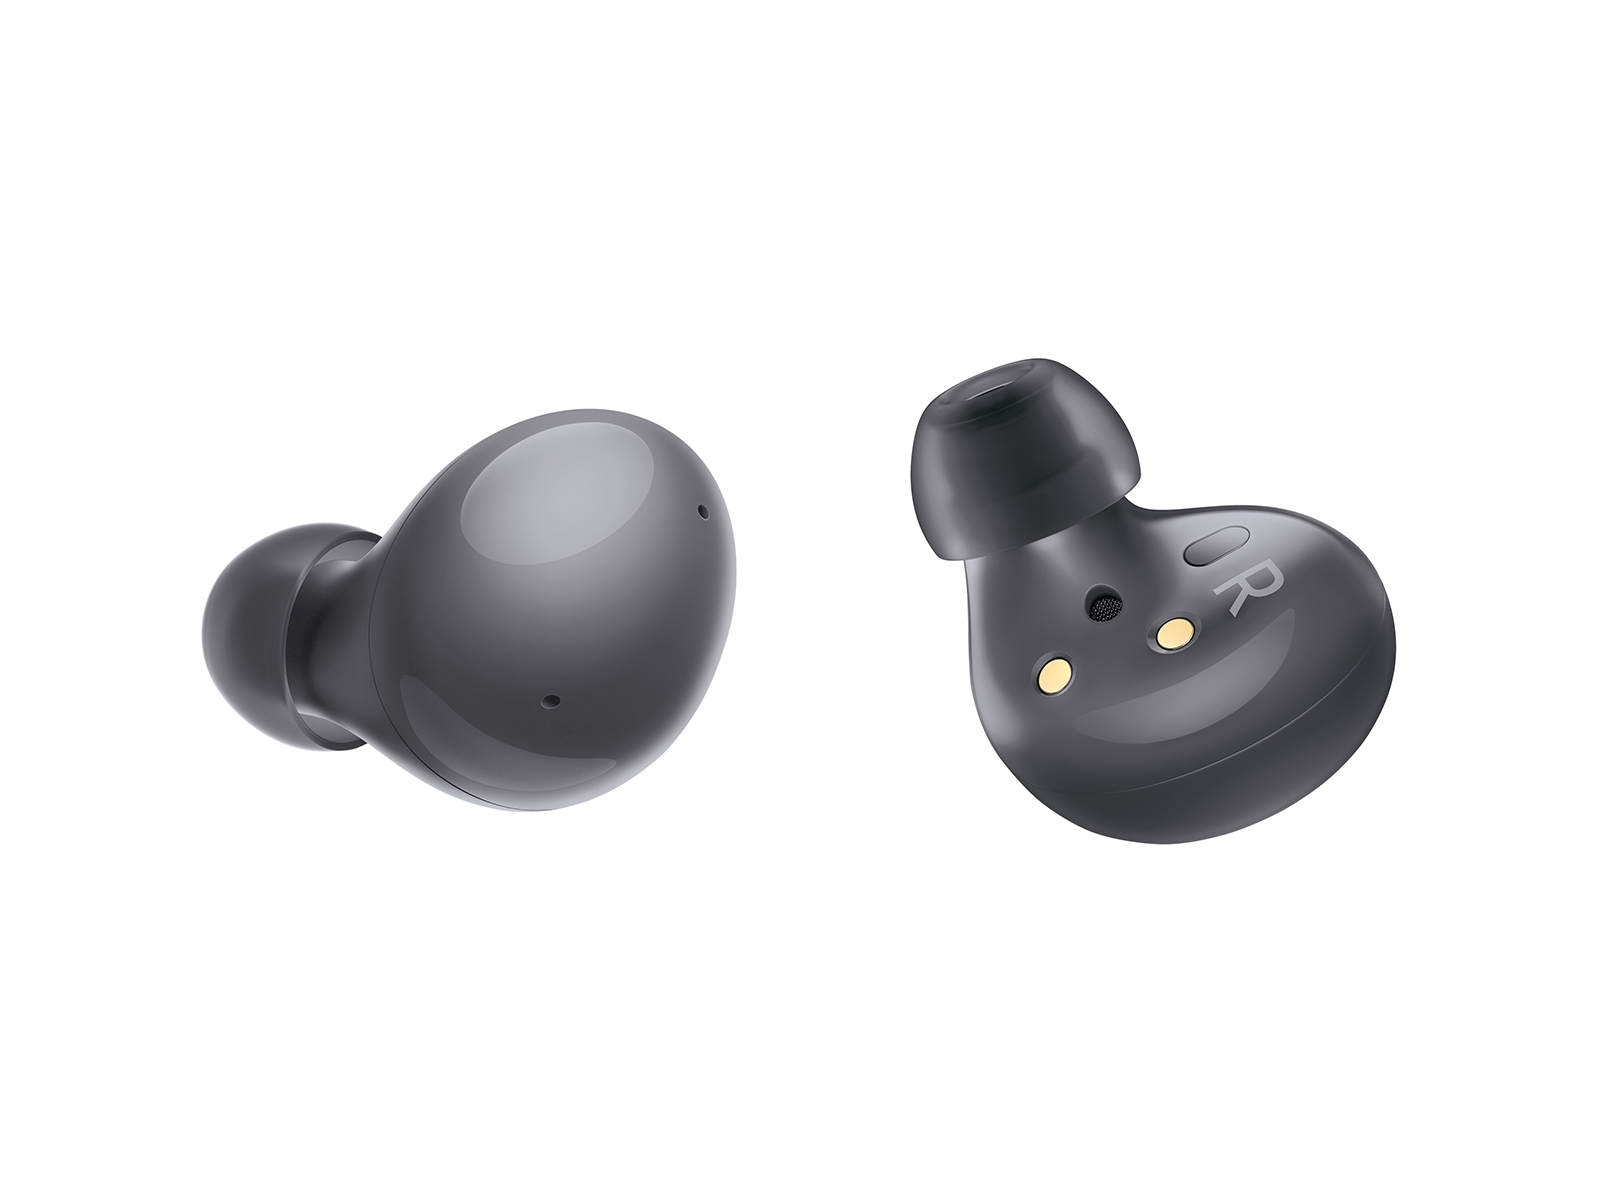 Galaxy Buds2, Graphite Audio - SM-R177NZKAXAR for 59.99(EDU) on Samsung after TRADE IN - $59.99